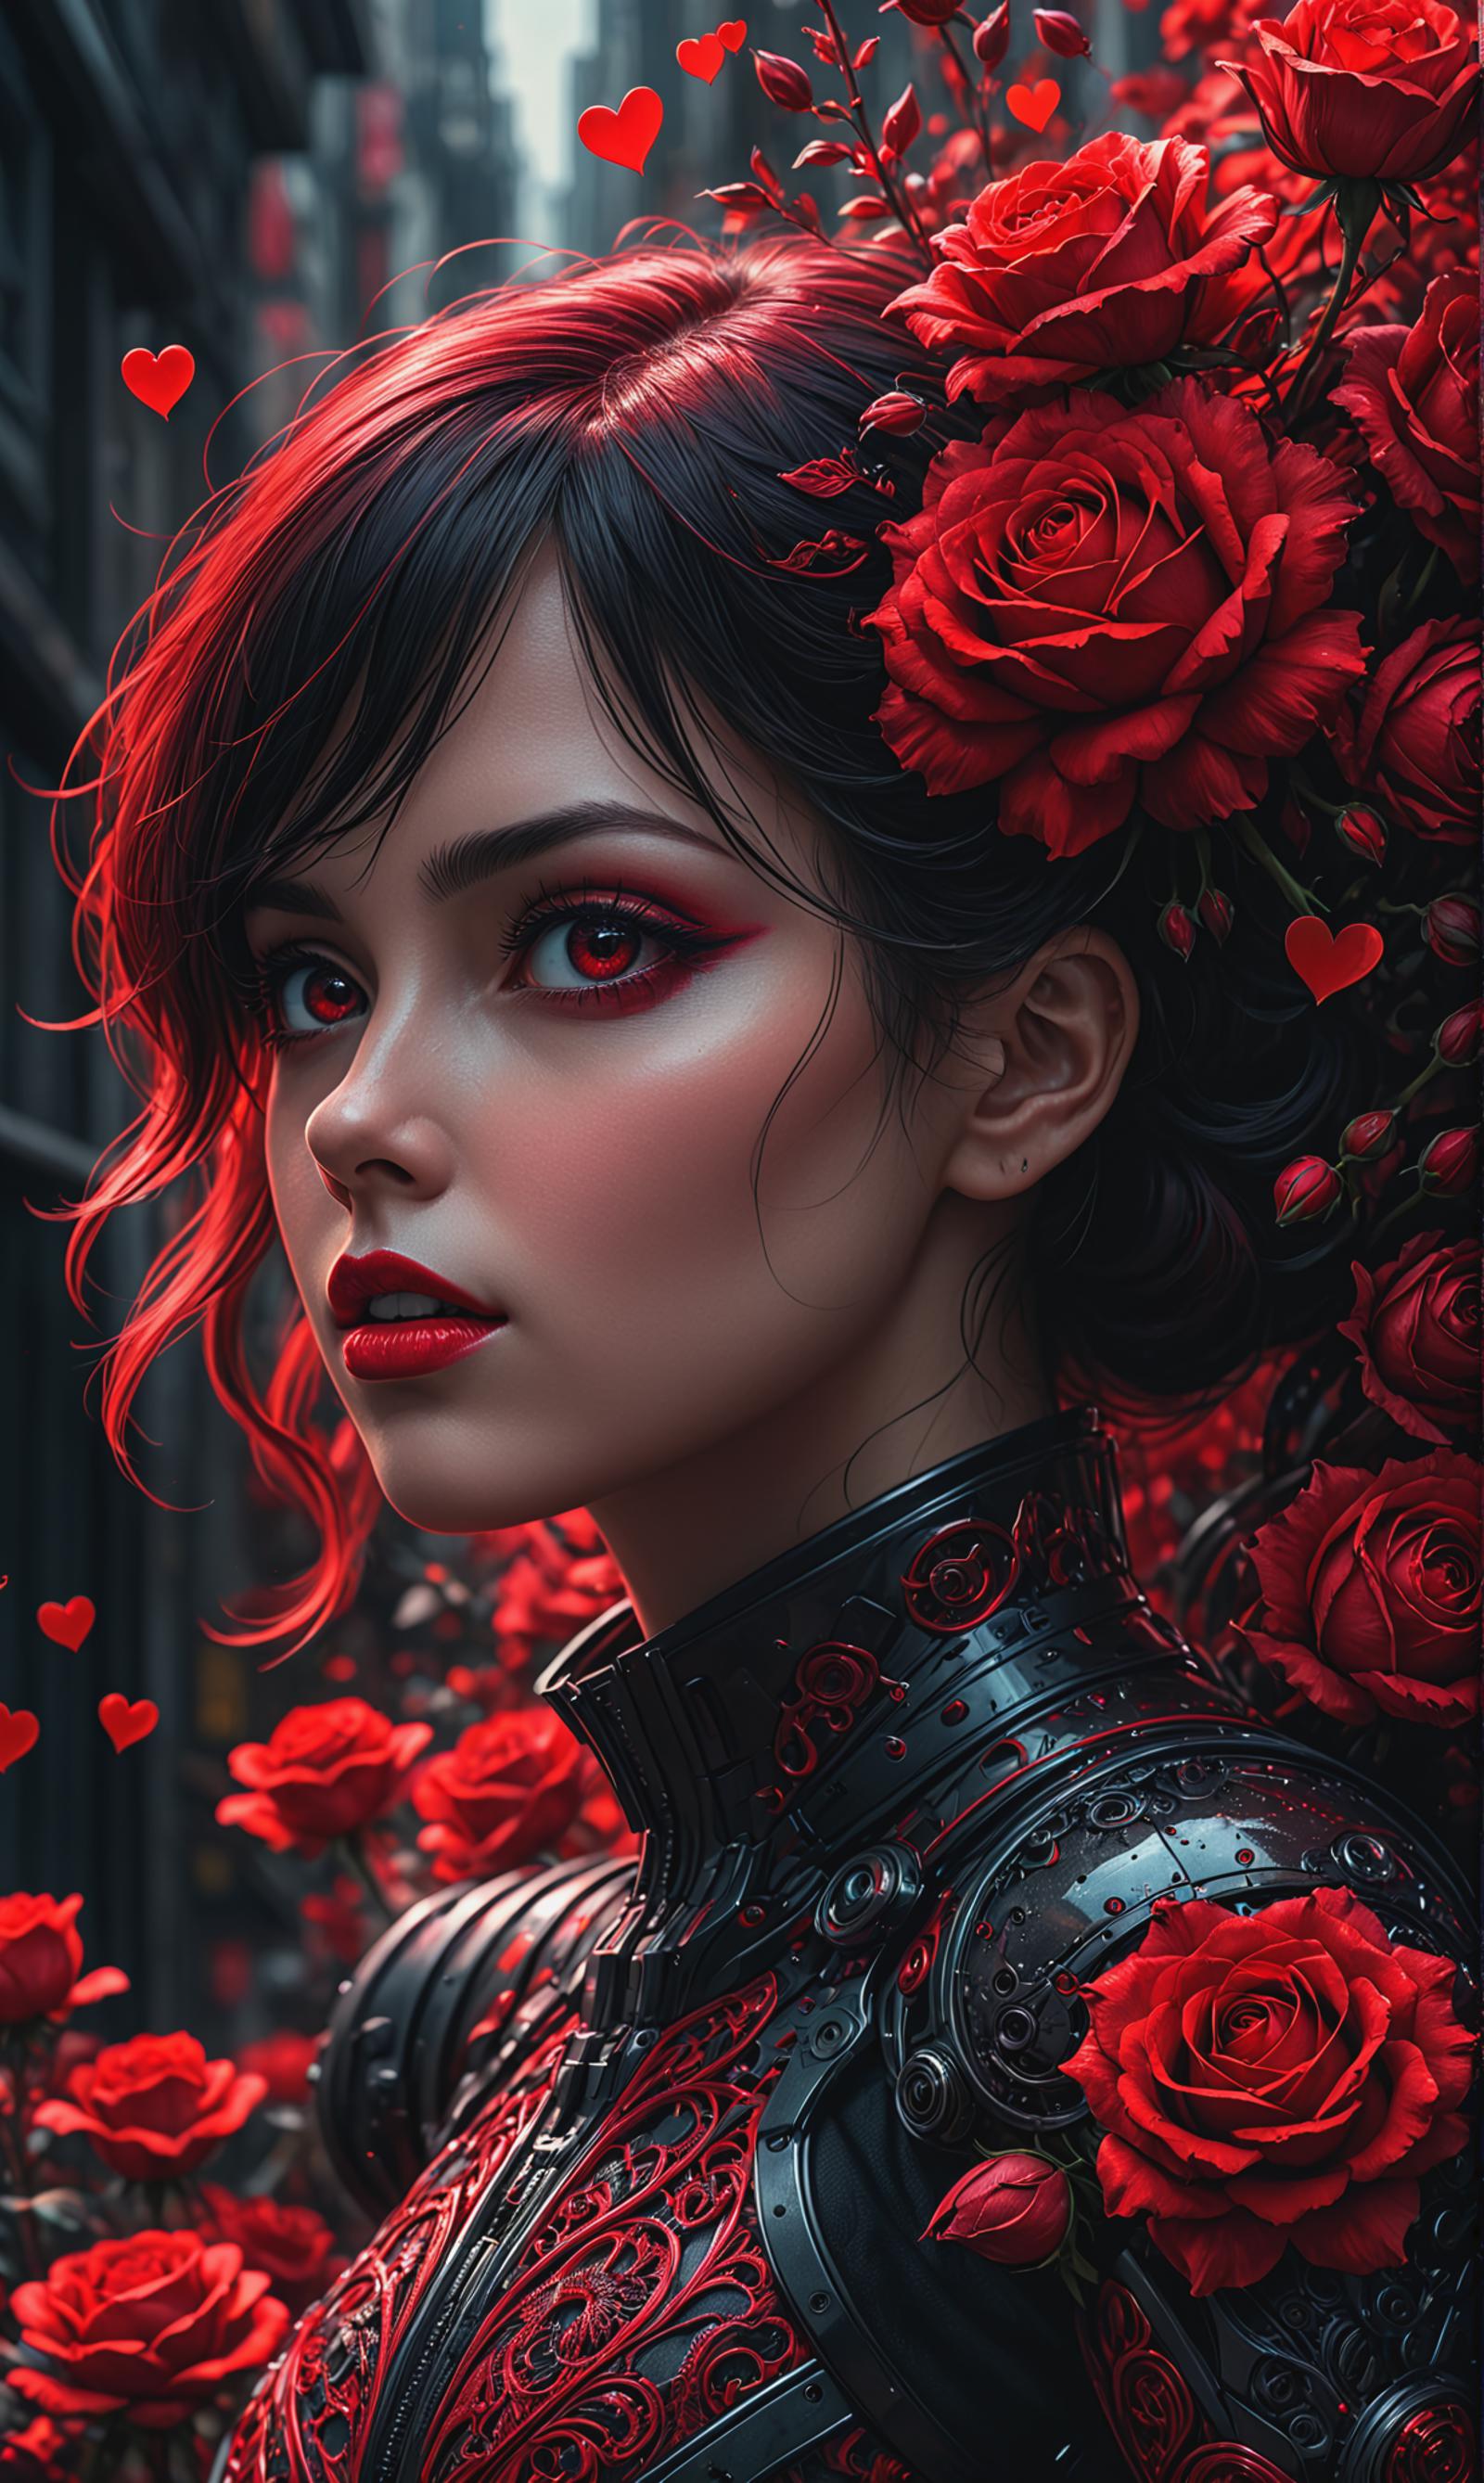 Digital Art Image of a Woman with Red Eyes and Red Lips Wearing a Black Armor with Red Roses and Hearts.